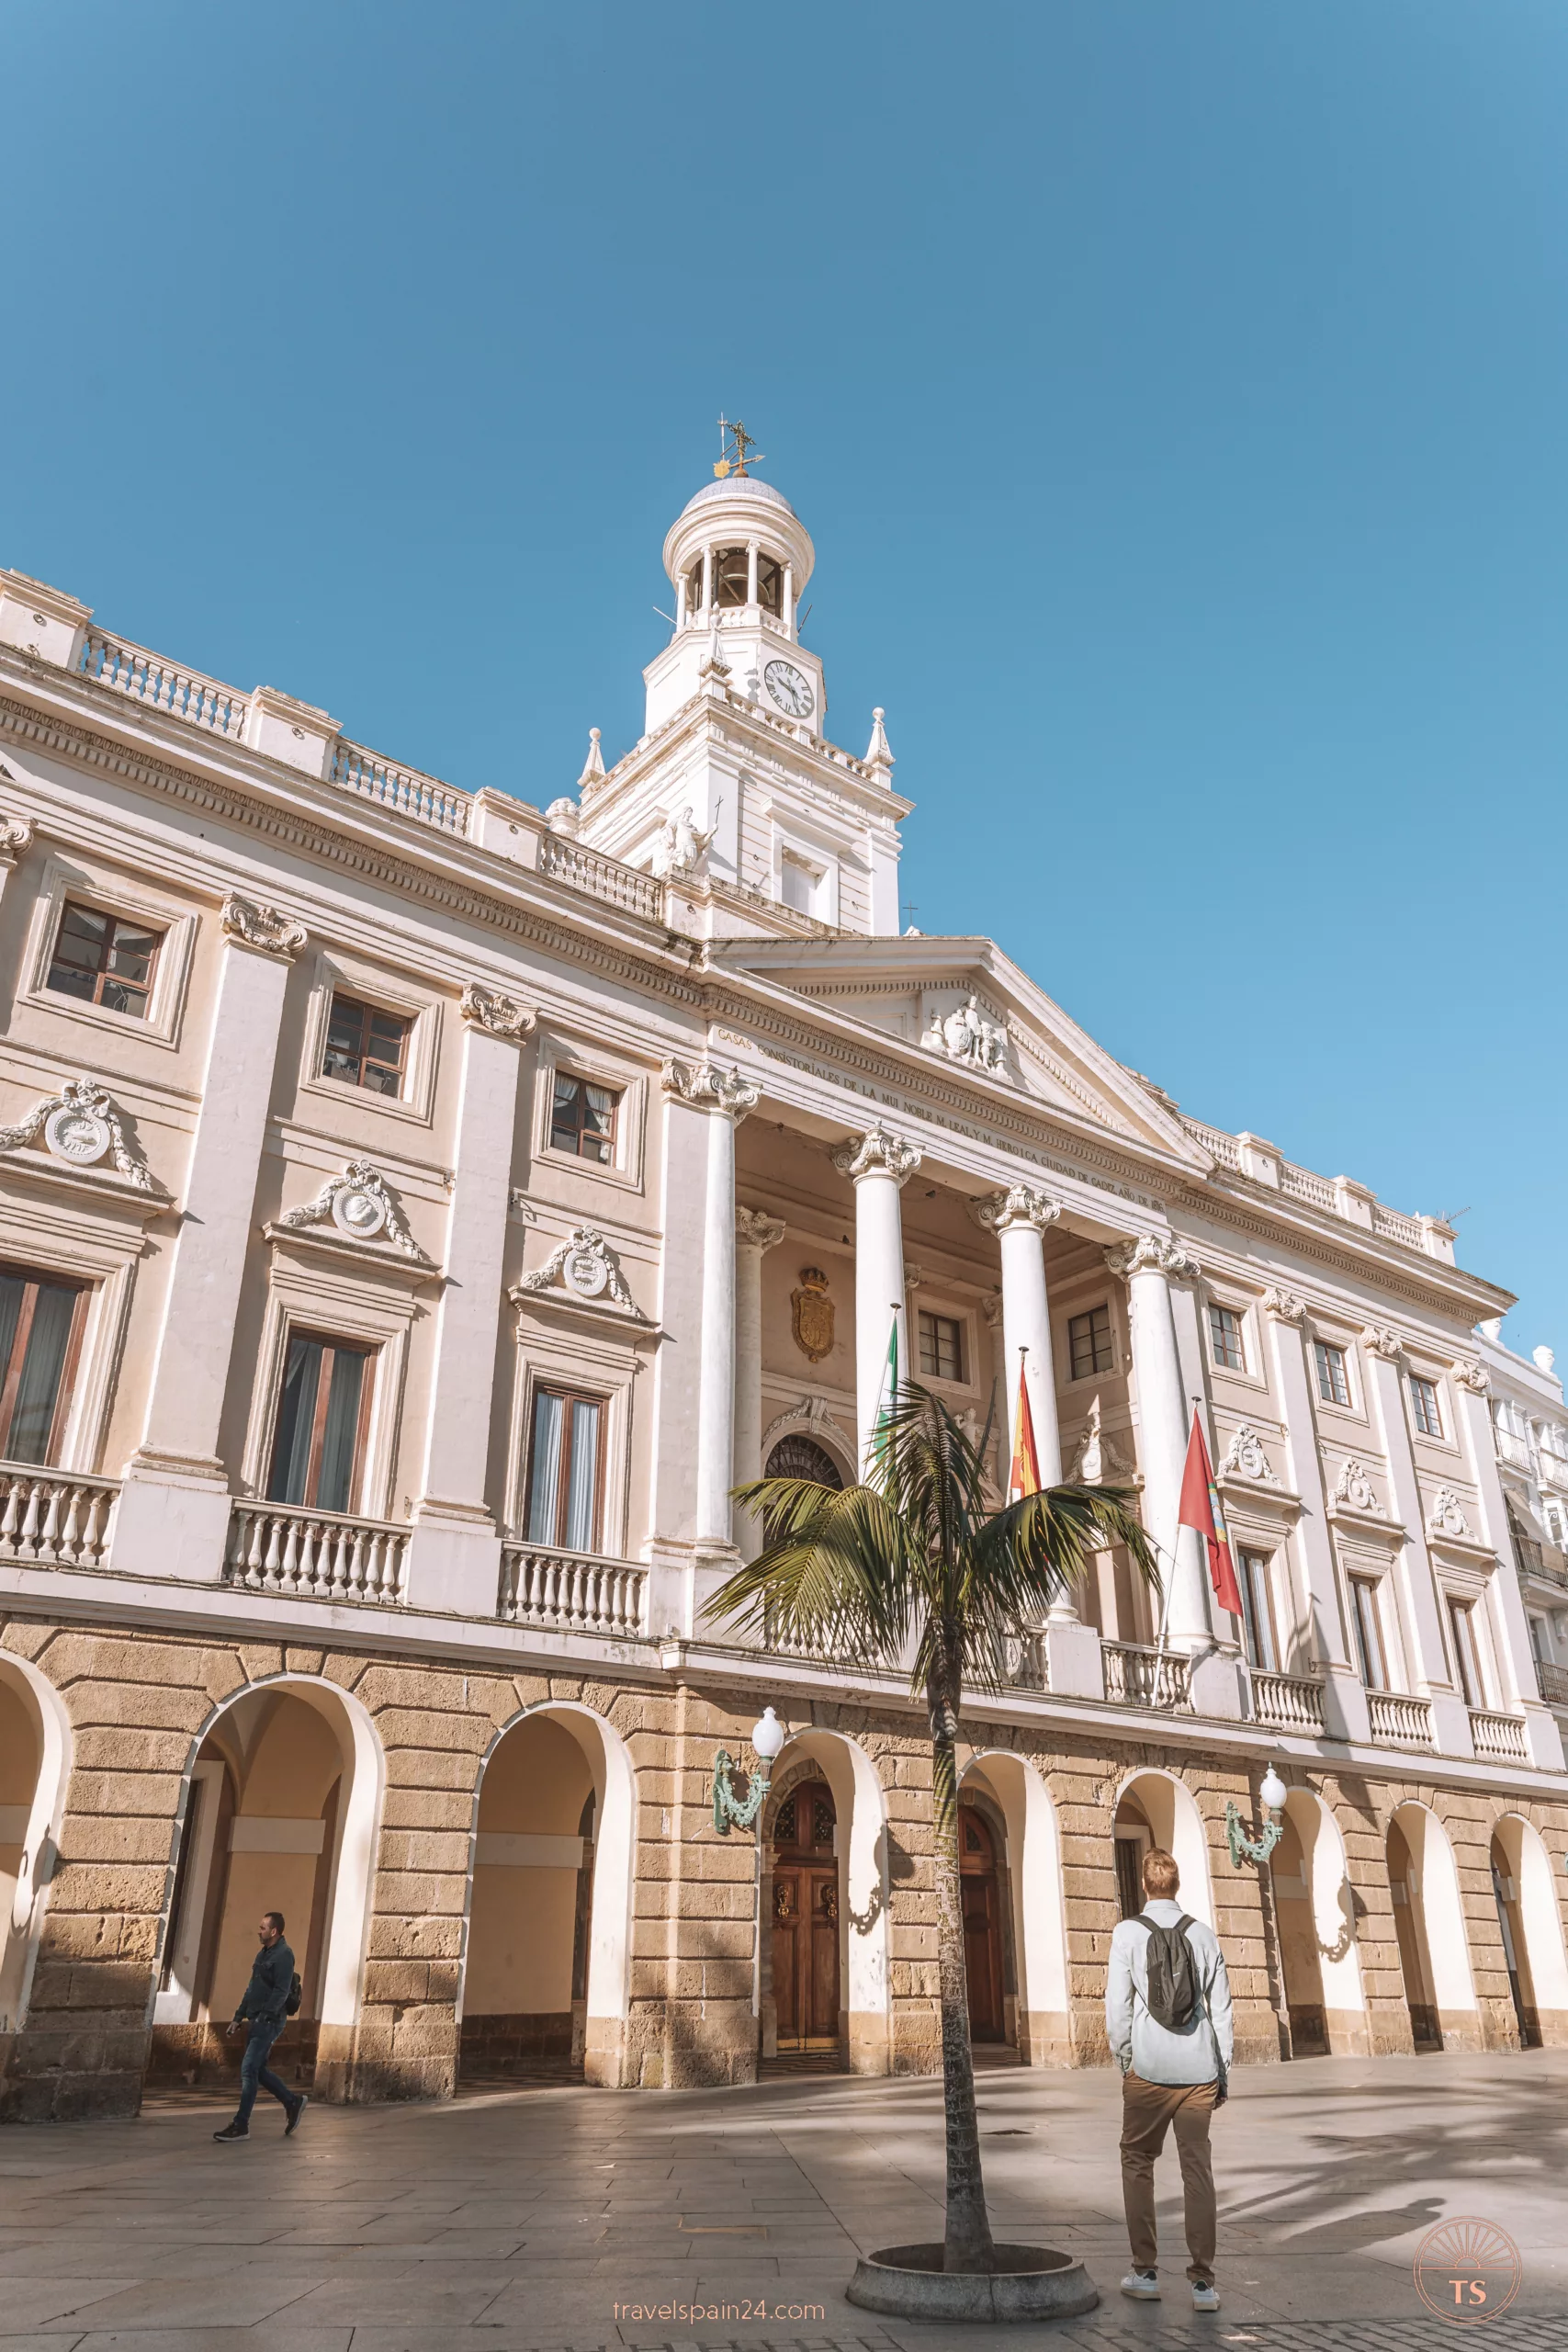 Timon van Basten in front of the city hall in Cadiz on a sunny morning. This scene is part of the Cadiz highlights, showcasing the historic architecture and vibrant atmosphere of the city.
